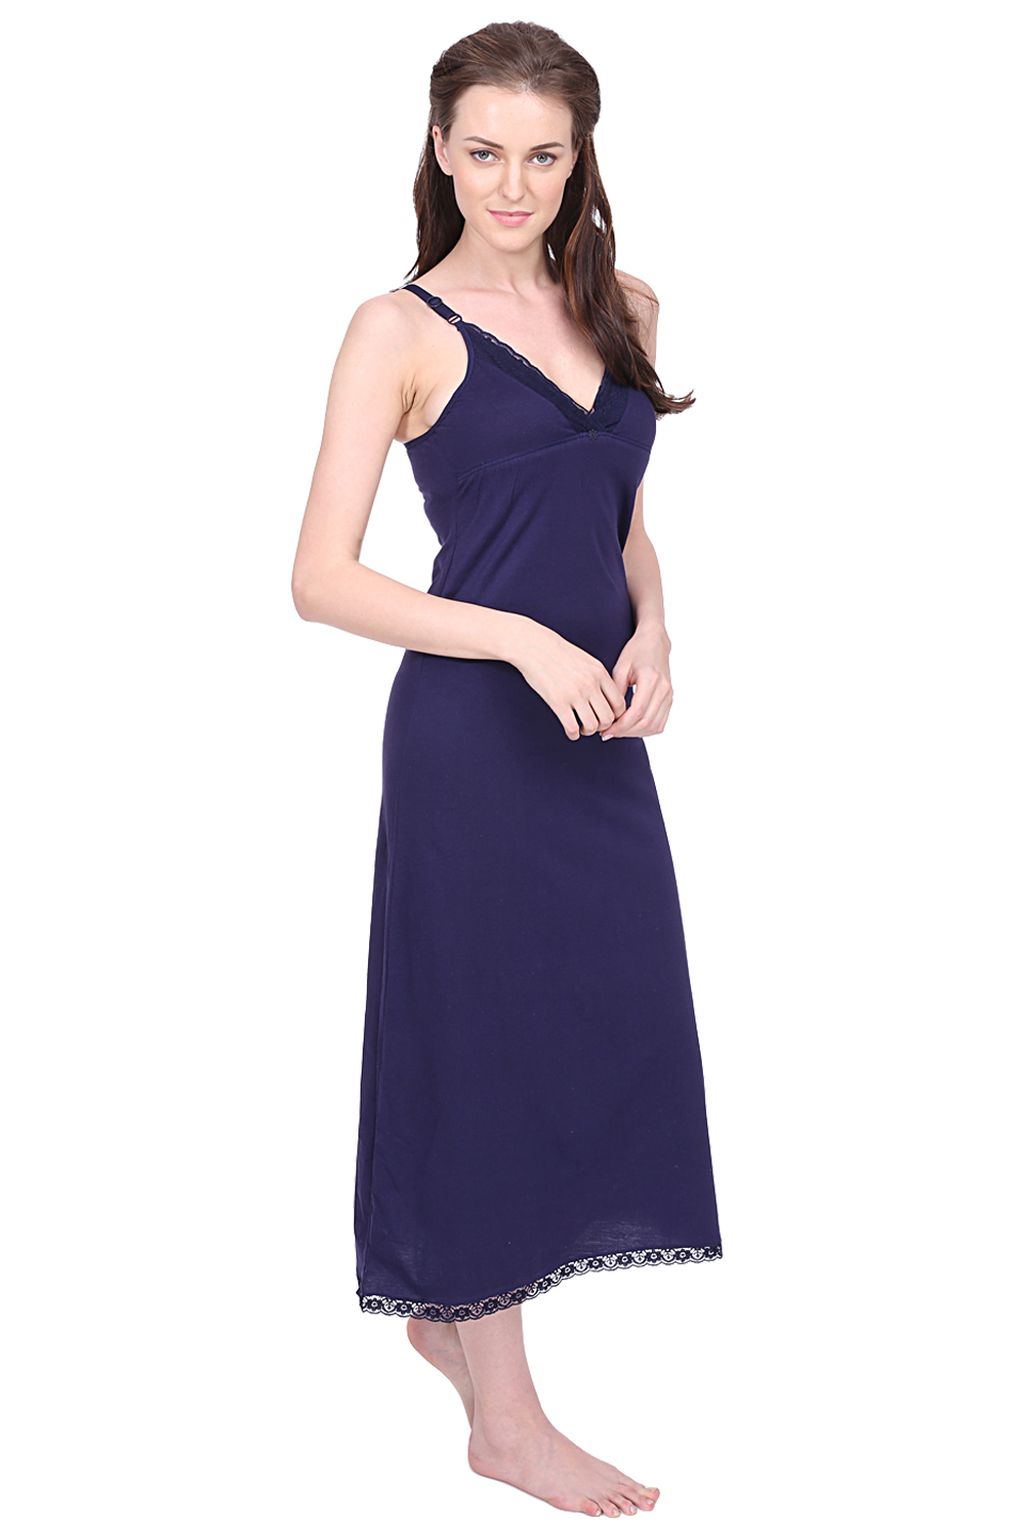 https://gowholesale.in/wp-content/uploads/sites/18/2022/03/RR_Rani_Navy_Nightdress-1.jpg